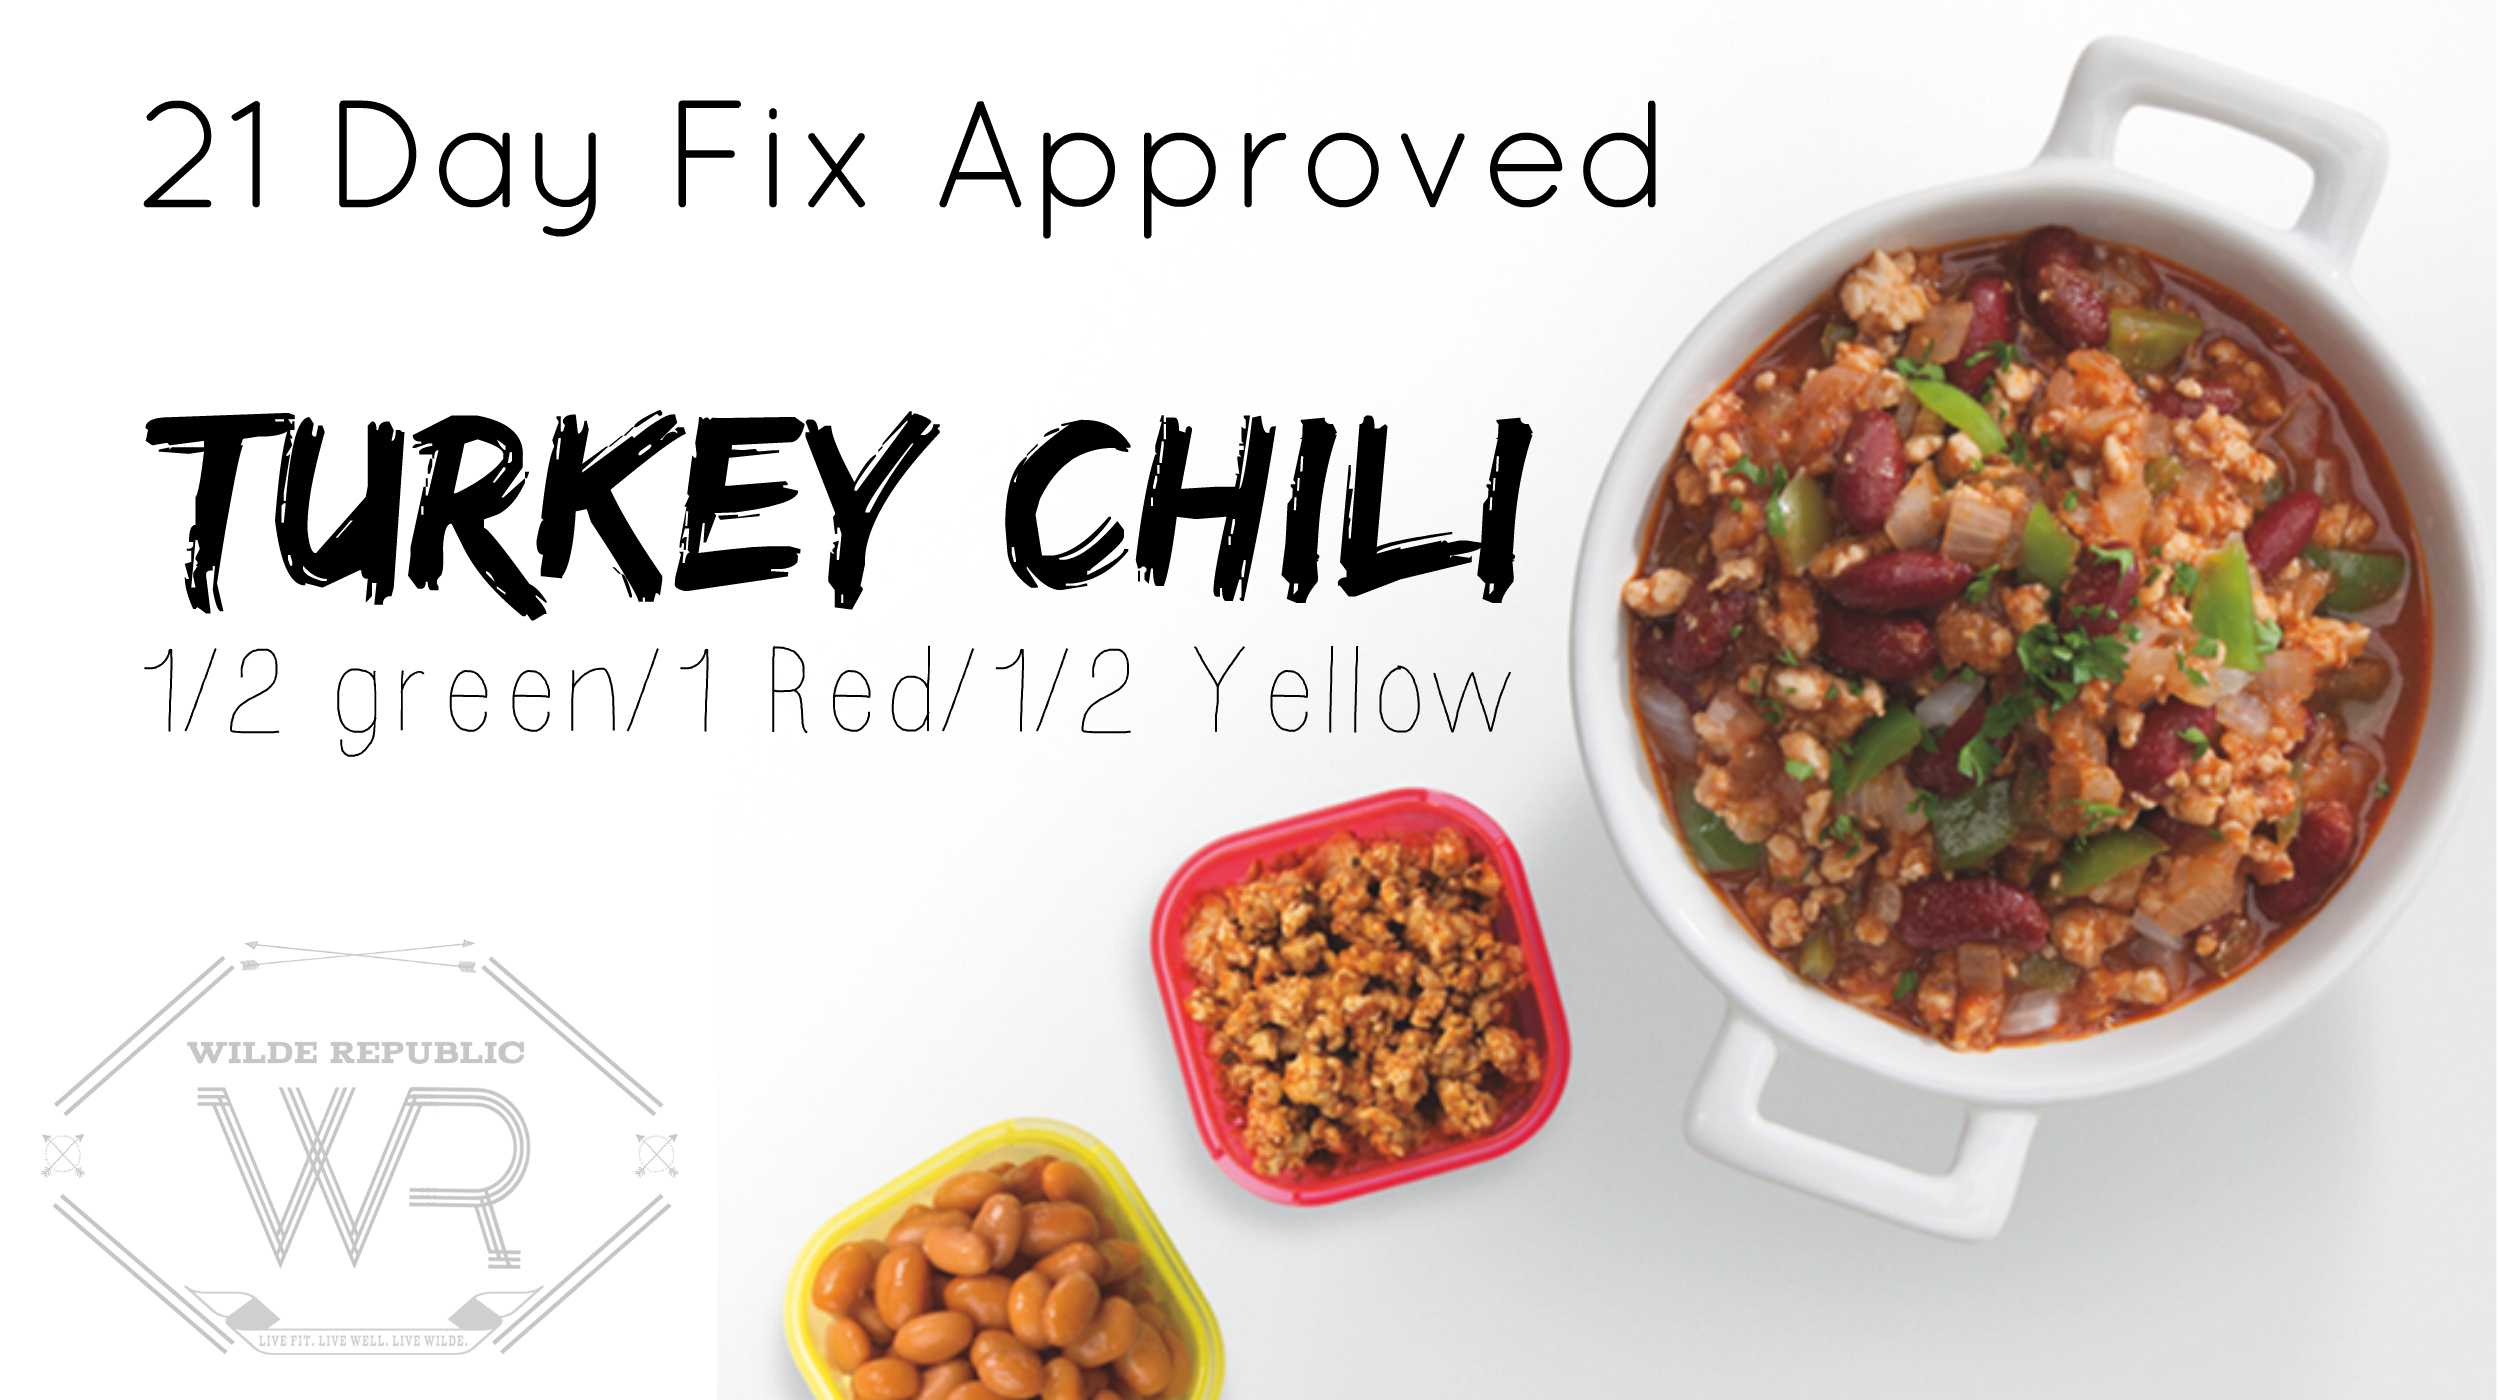 21 Day Fix Approved Turkey Chili: Household Staple